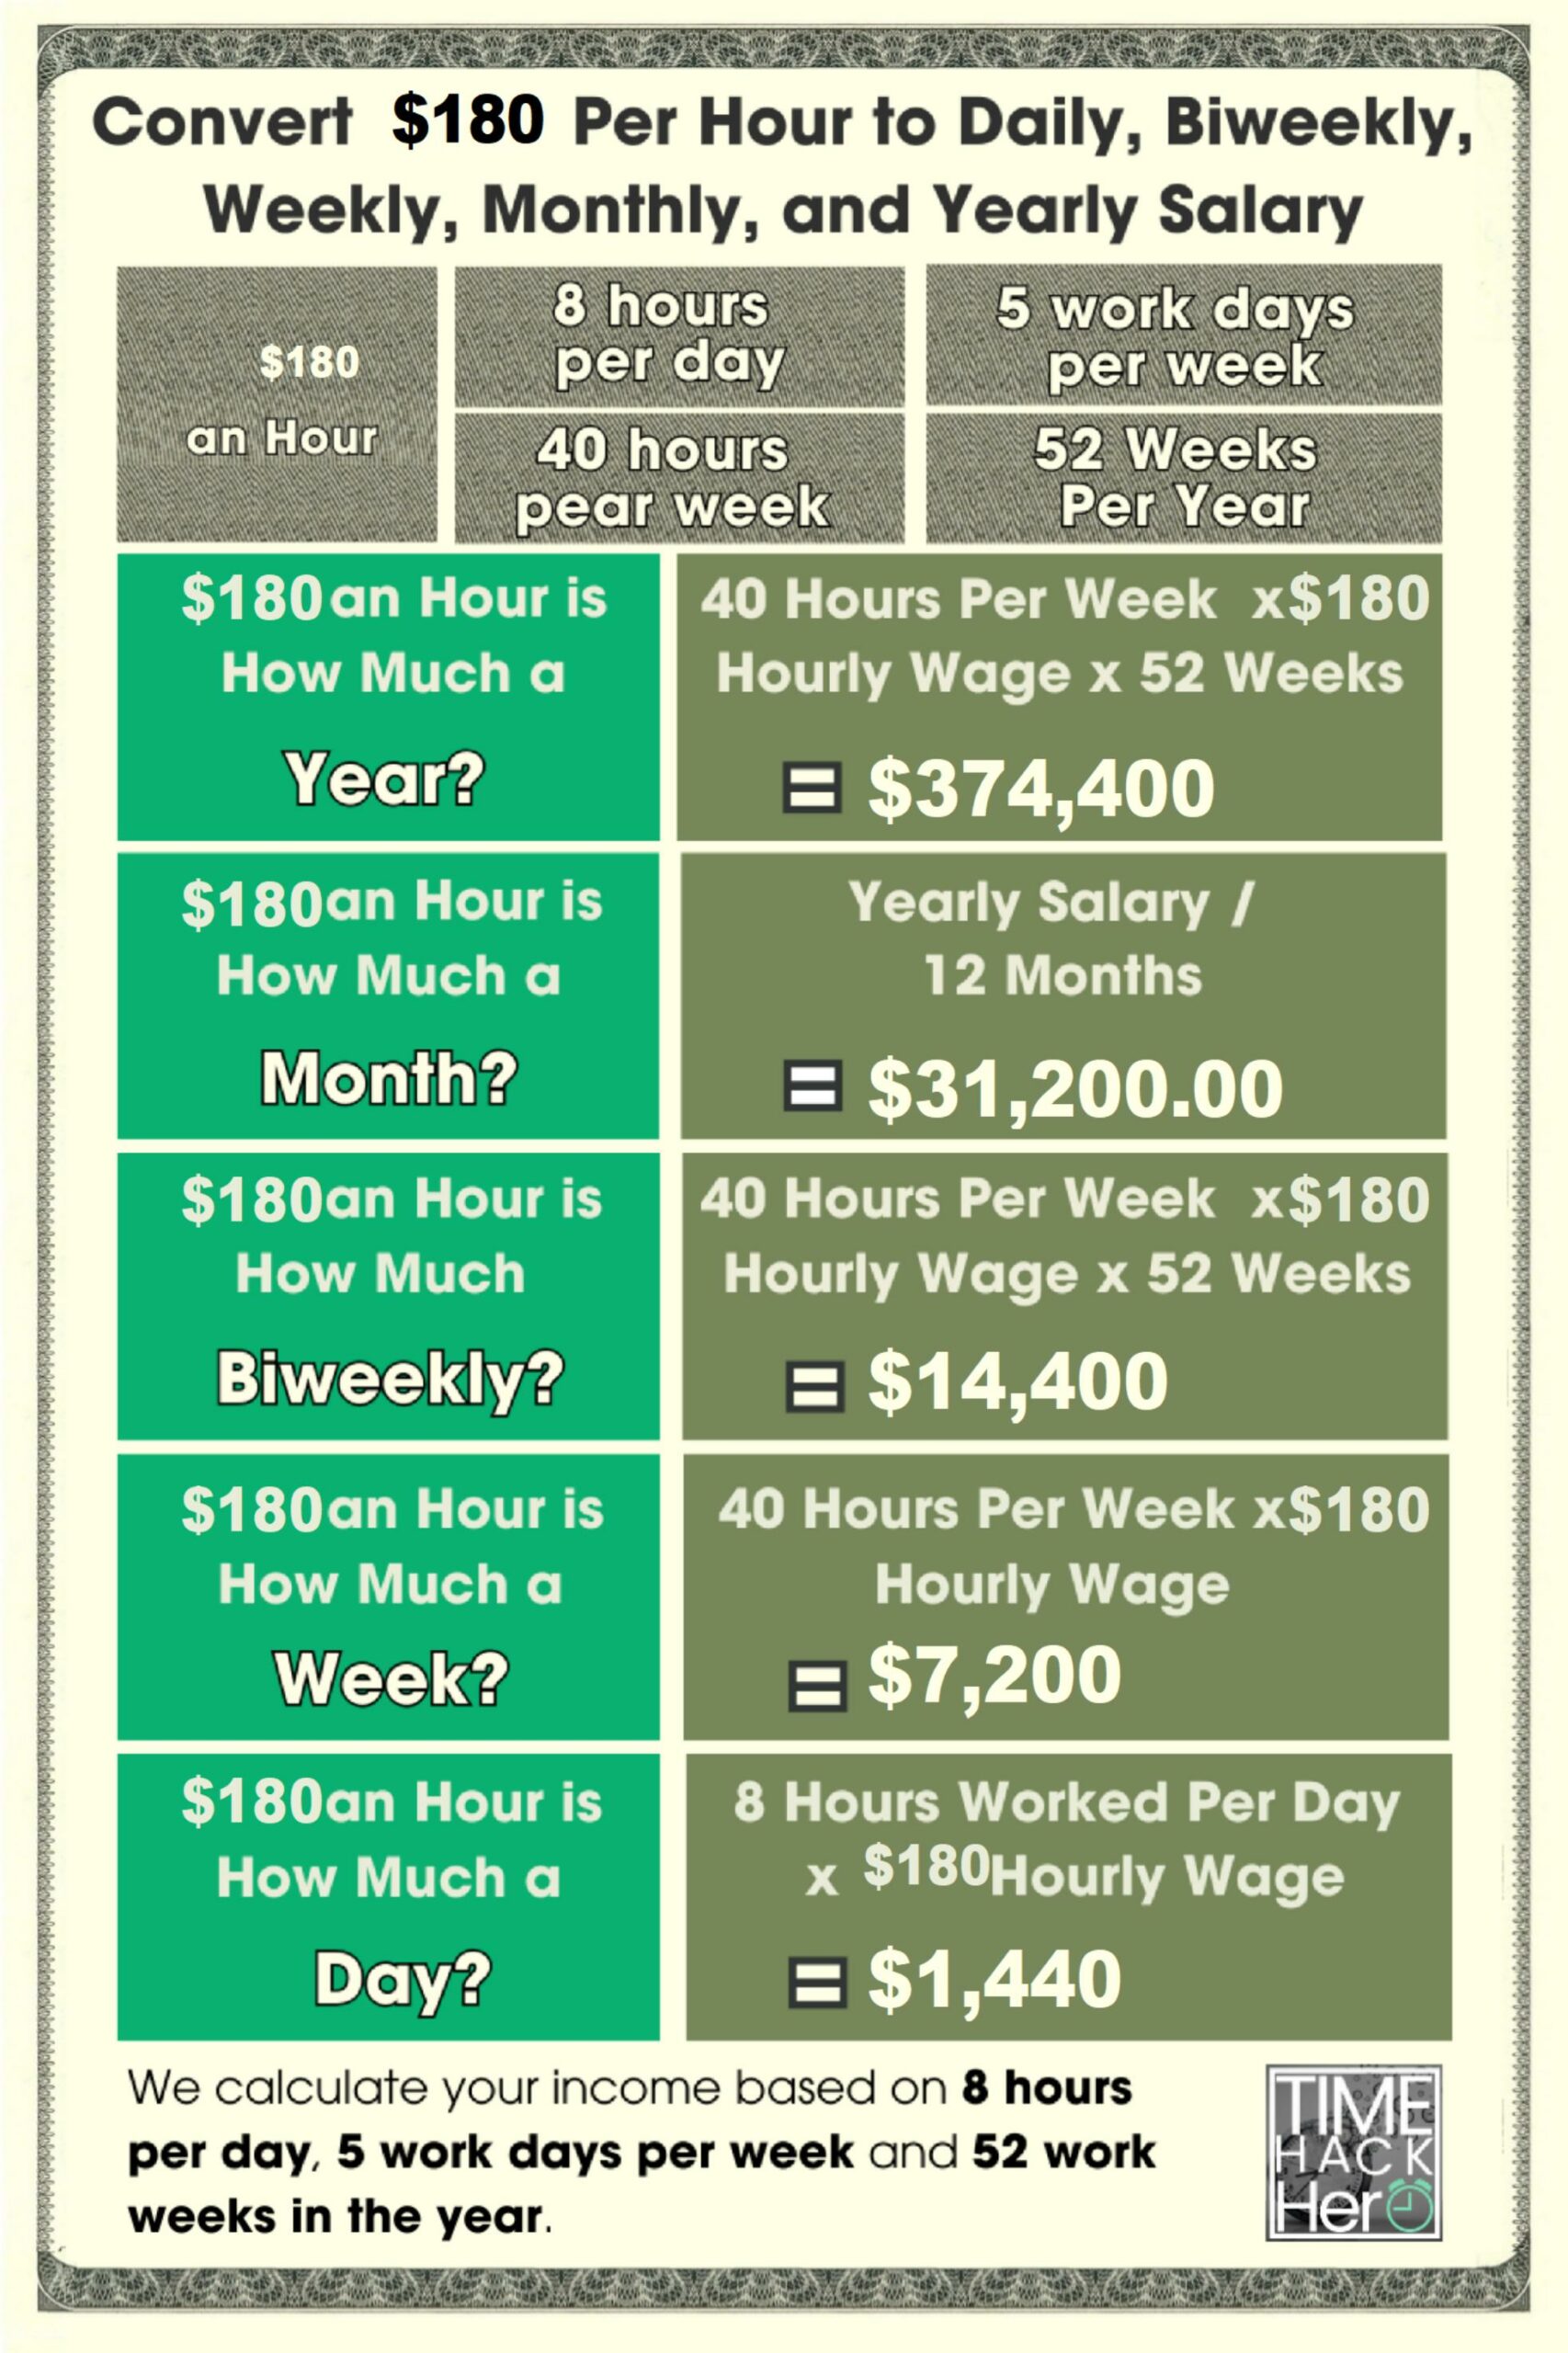 Convert $180 Per Hour to Weekly, Monthly, and Yearly Salary